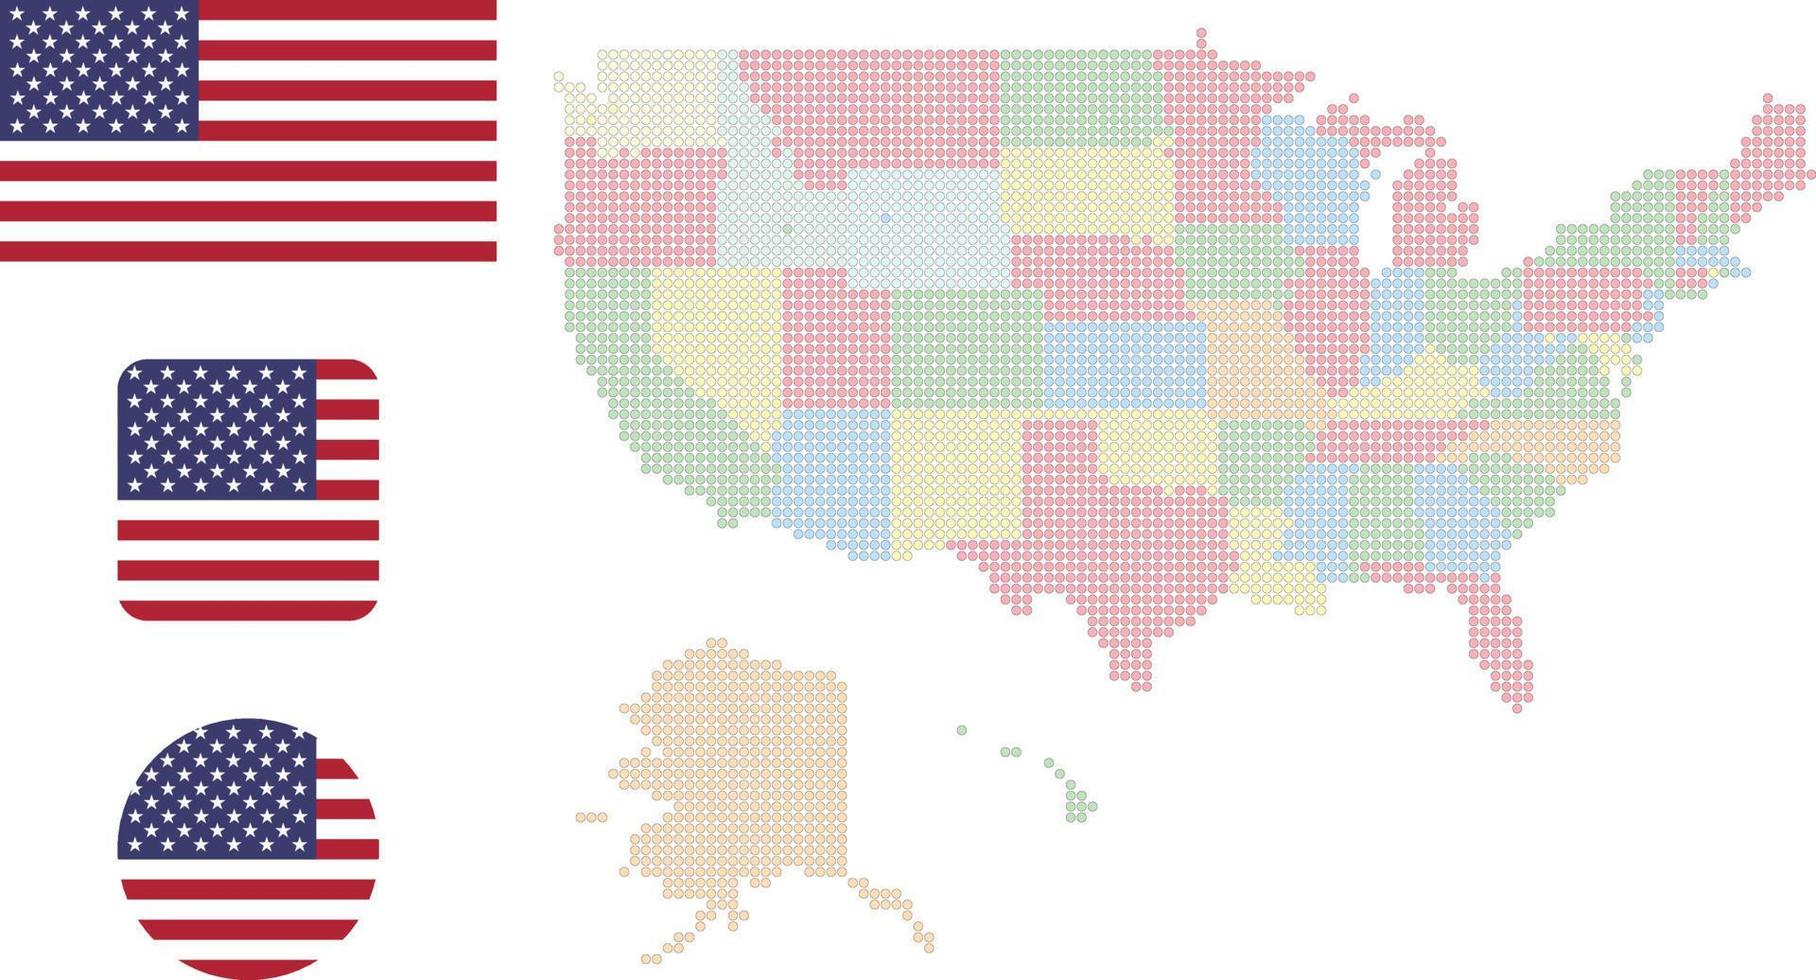 United States map and flag flat icon symbol vector illustration